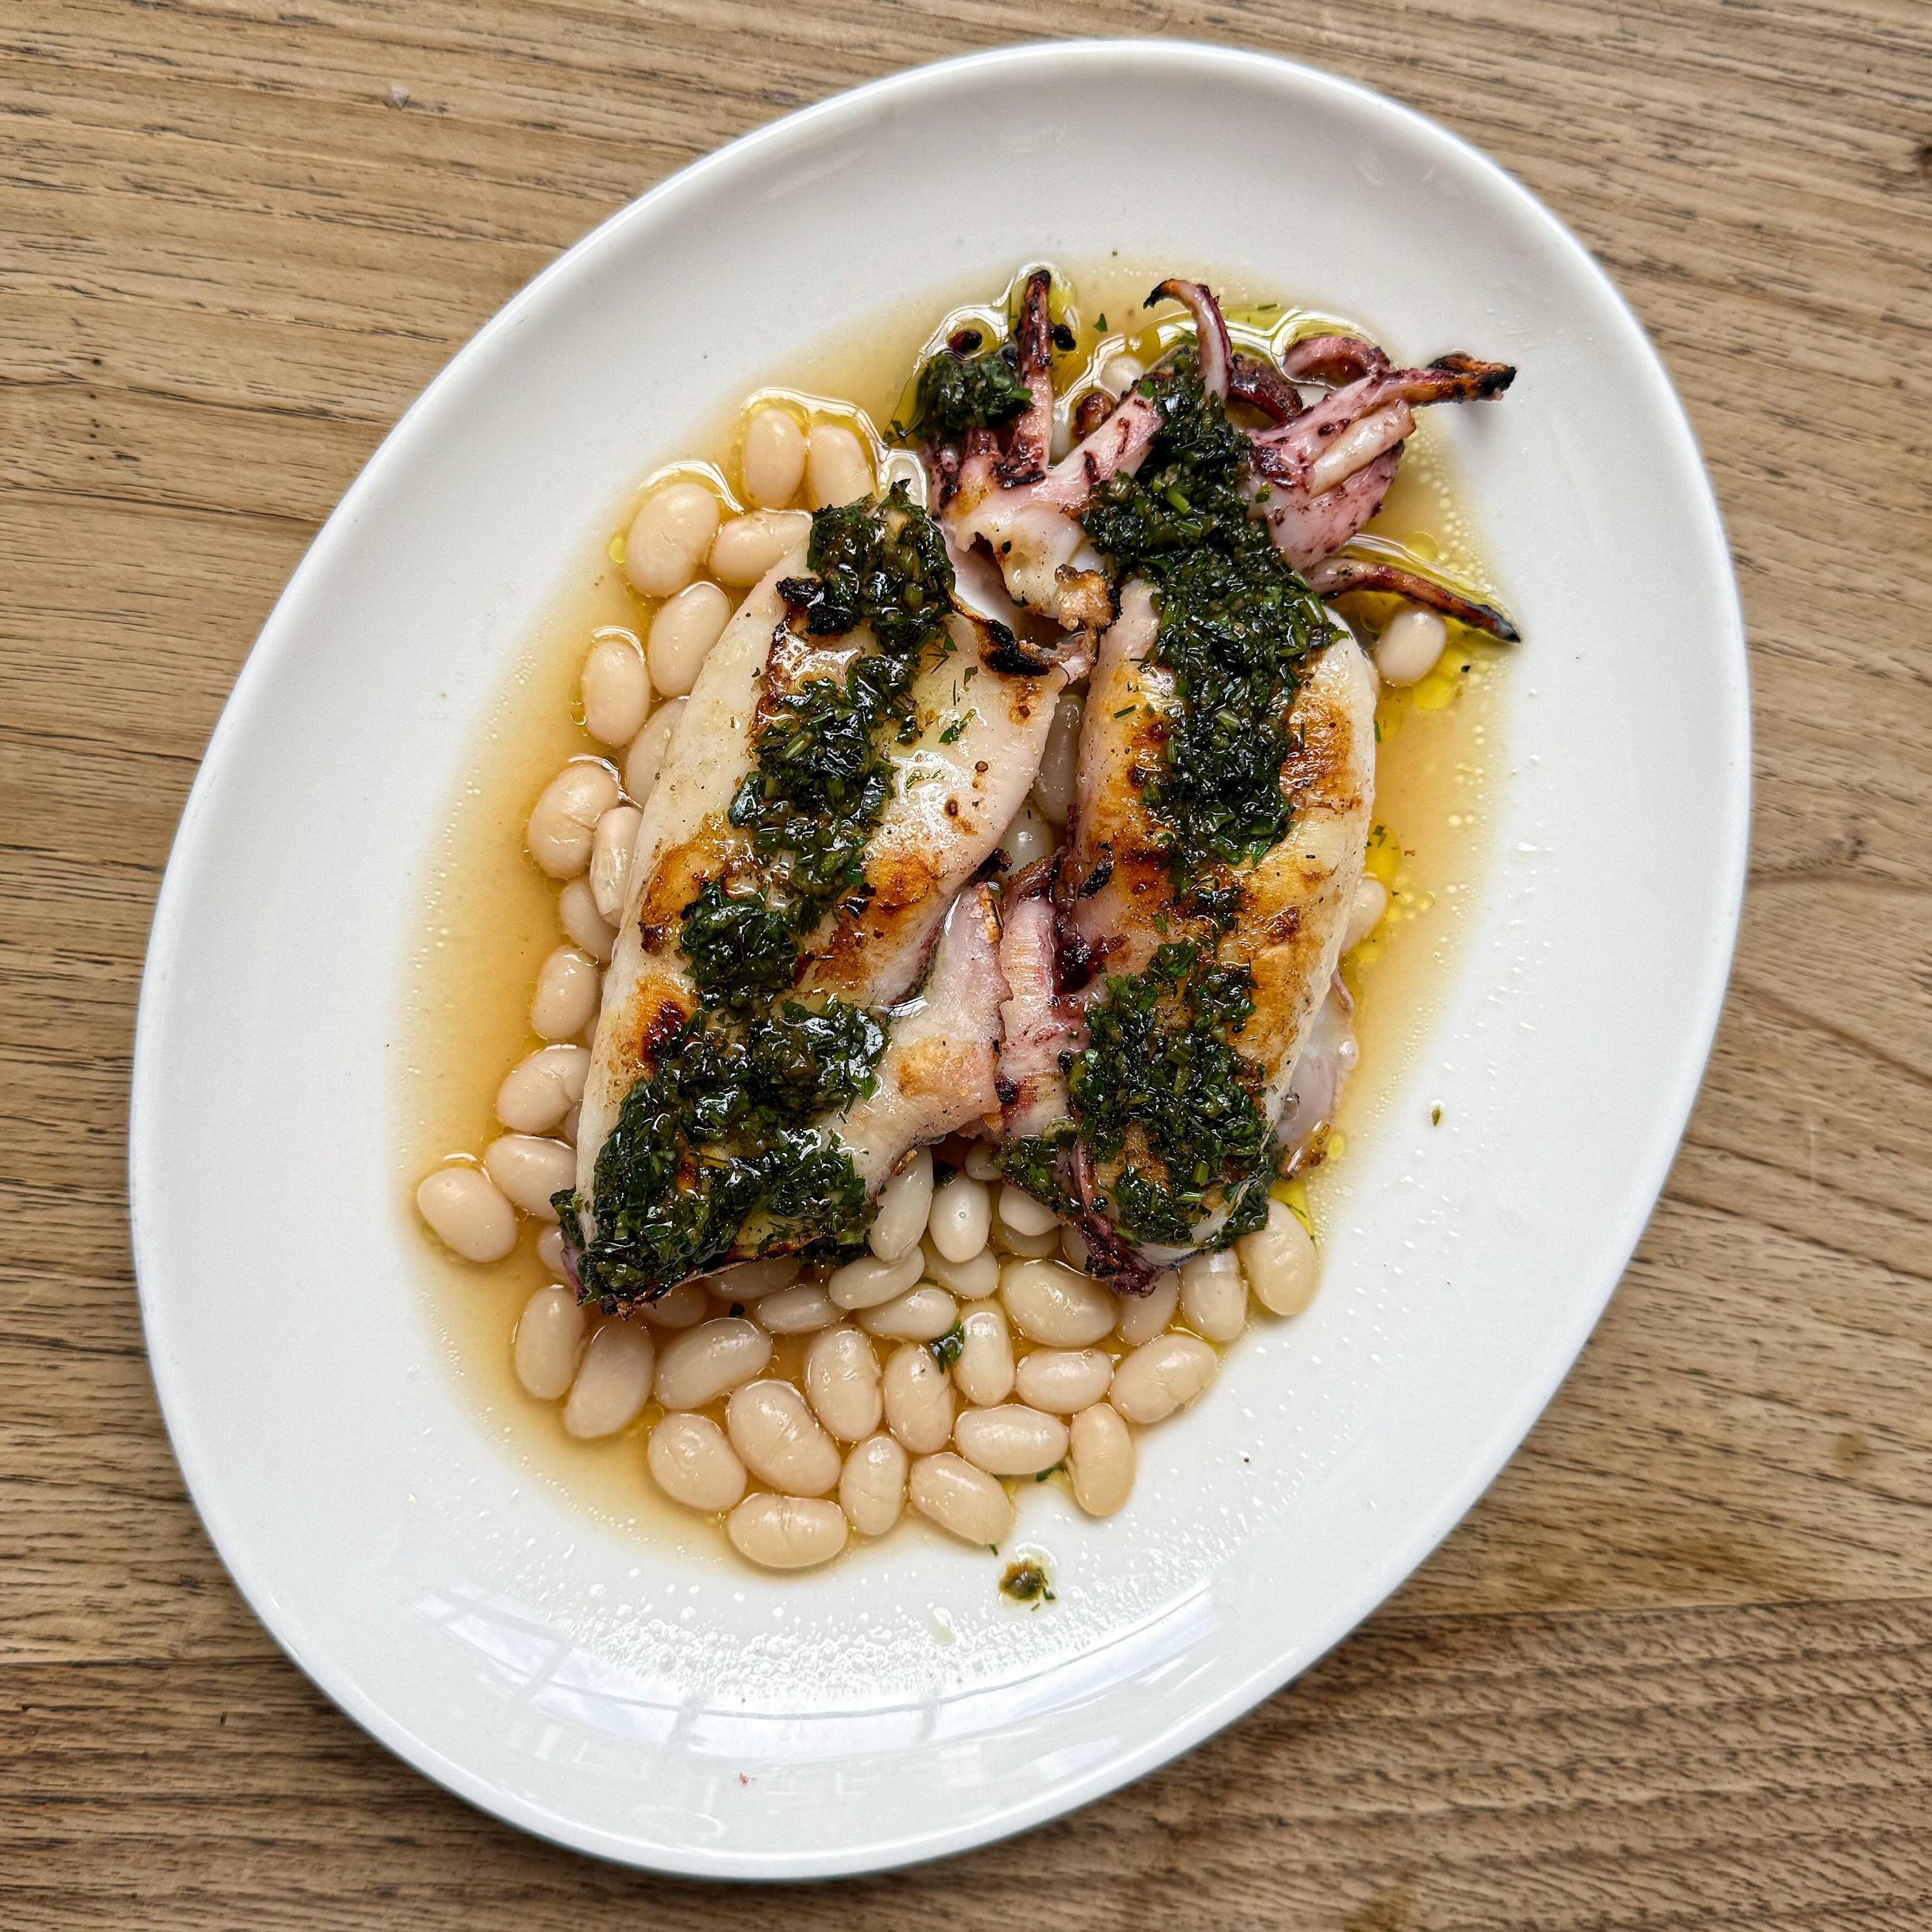 Squid and beans. At Michelin-starred &quot;Brat&quot; in Shoreditch. 
&mdash; 
#squid #brat #shoreditch #london  #onemichelinstar 
.
.
#mystorywithmichelin #michelinplate #michelinfood #delicious #eeeeeats #food #foodie #foodgasm #foodpics #foodporn 